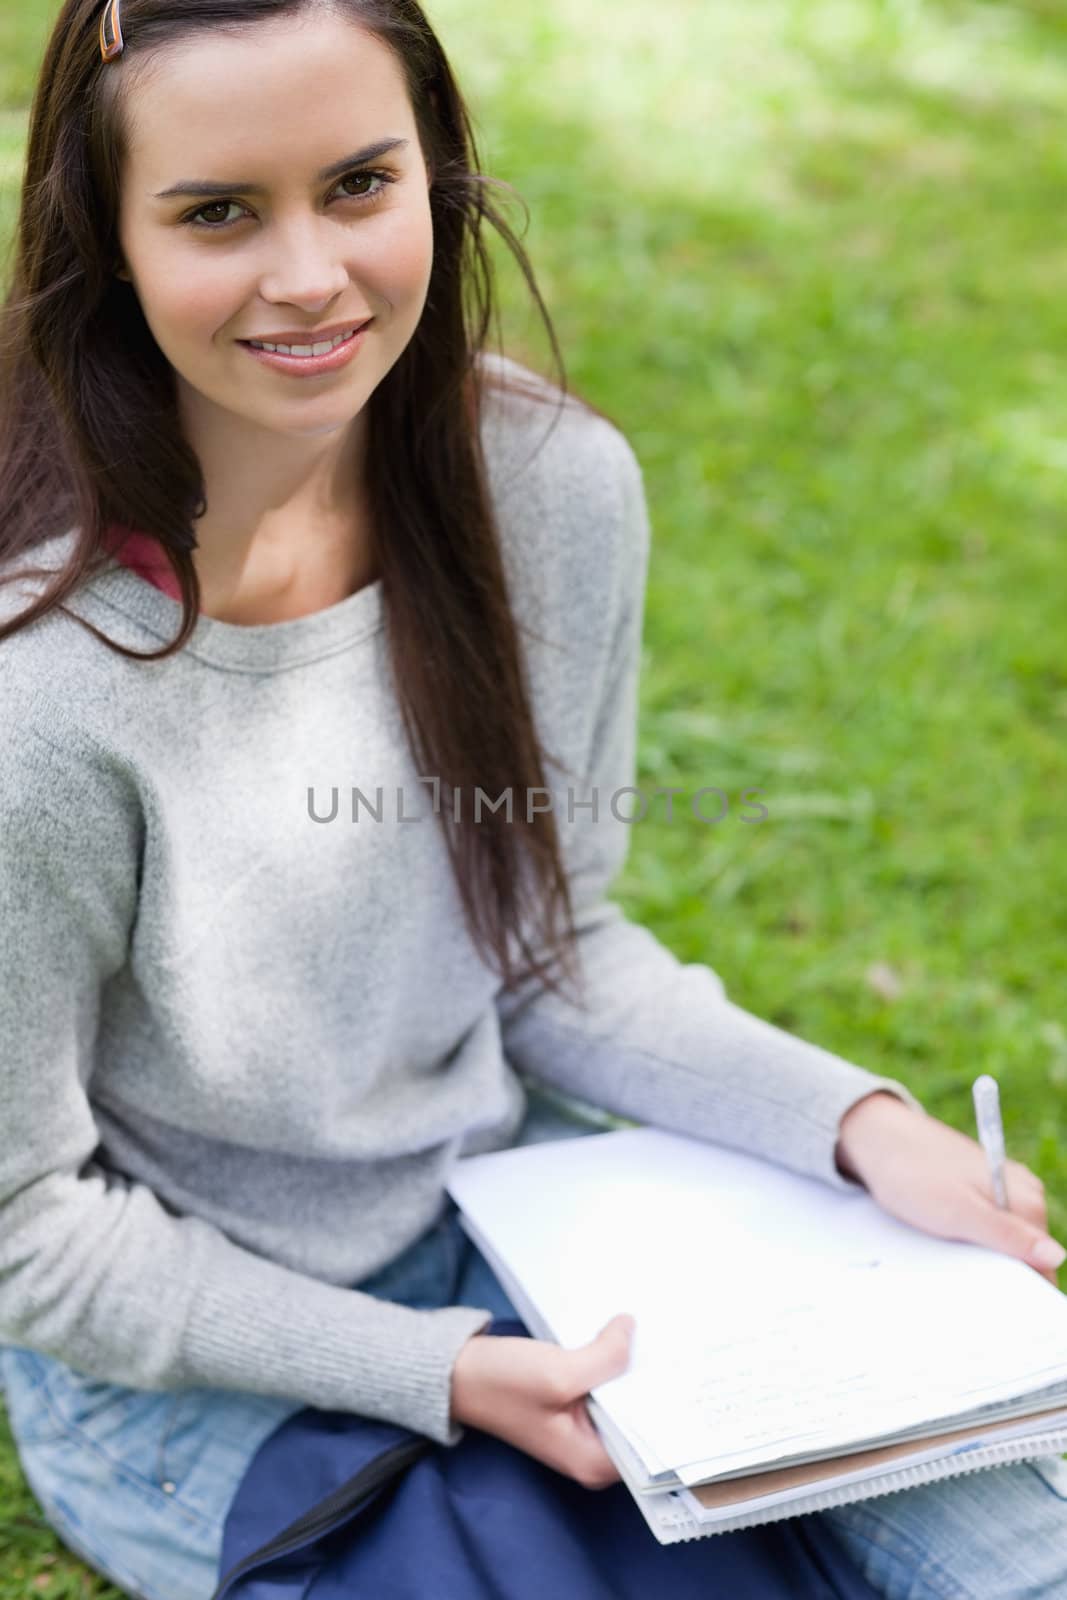 Smiling young girl sitting in a park while looking at the camera by Wavebreakmedia